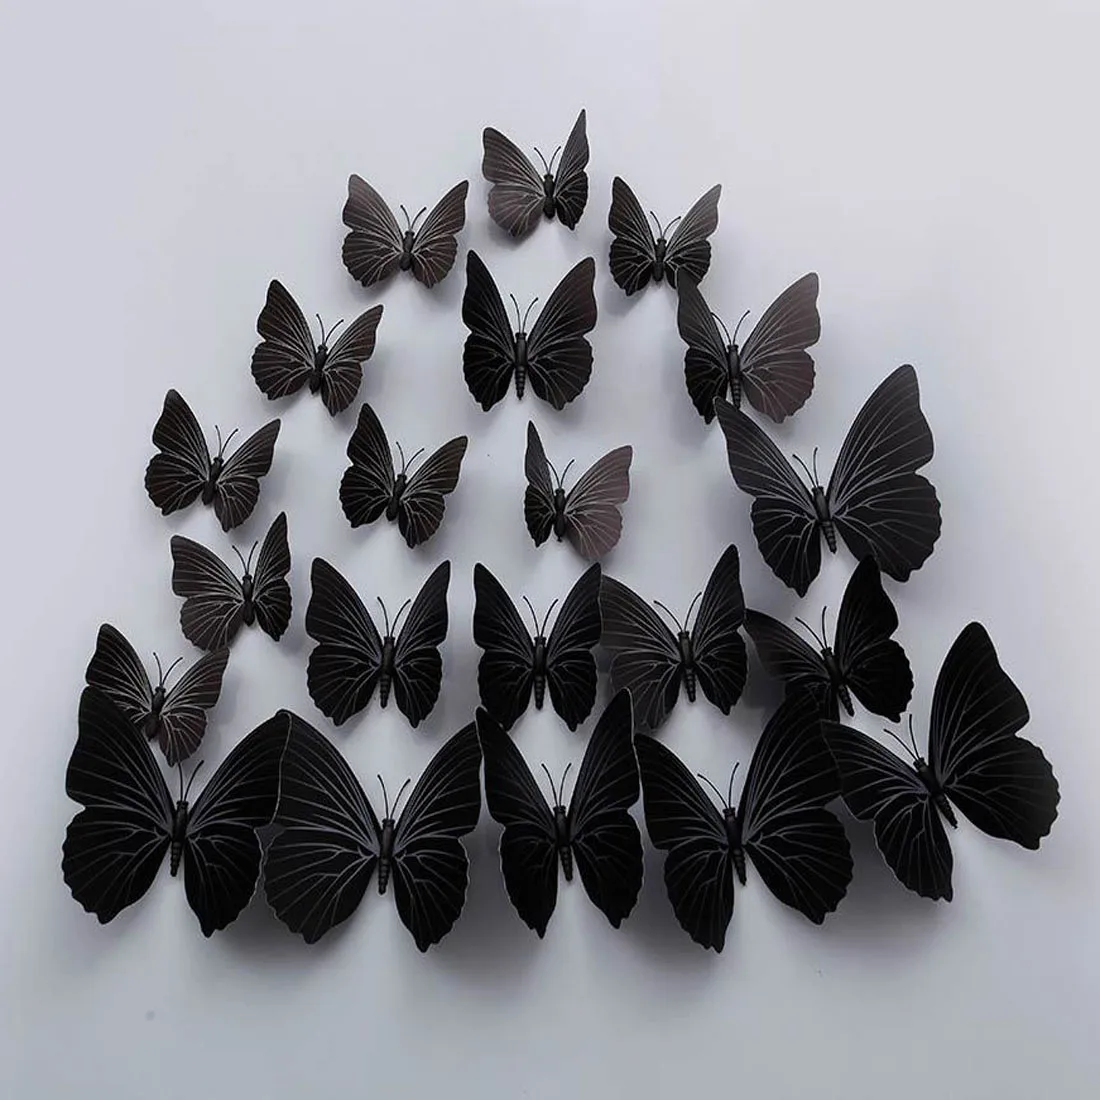 New Style 12Pcs 3D Decorative Butterflies Wall Stickers For Kids Rooms Home Room Decor Butterflies For Wedding Home Decoration